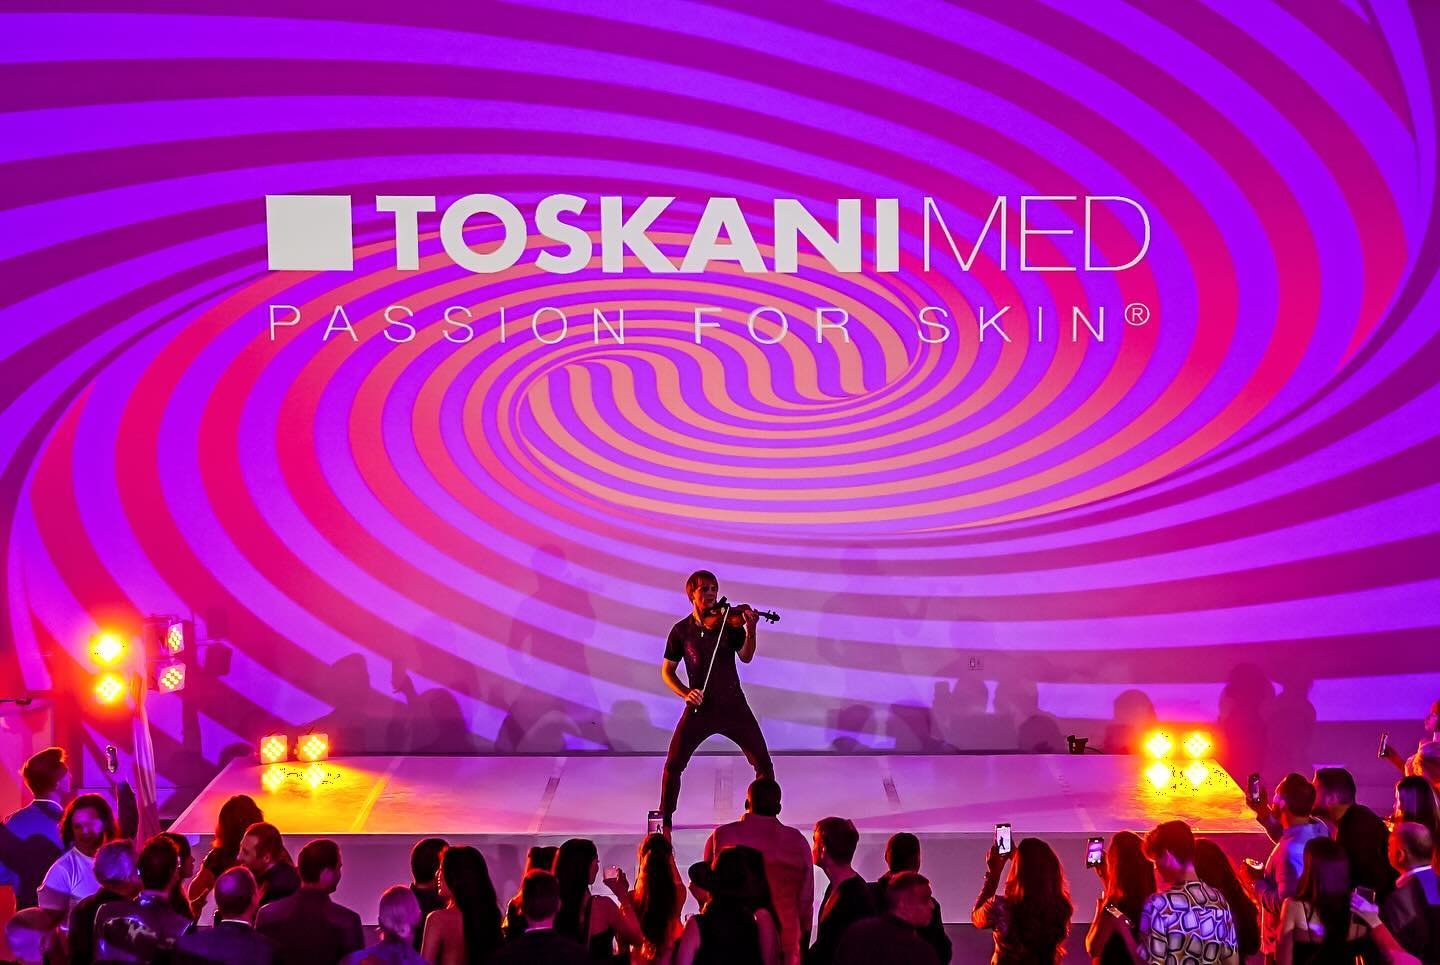 Sensory immersion 🪩
Loved this incredible electronic violin performance by @kostialucky paired with fantastic visuals for the Toskani USA launch party.
-
-
-
-
-
-
#violinist #electronicmusic #electronicviolinist #miamivenue #miamieventcenter #miami